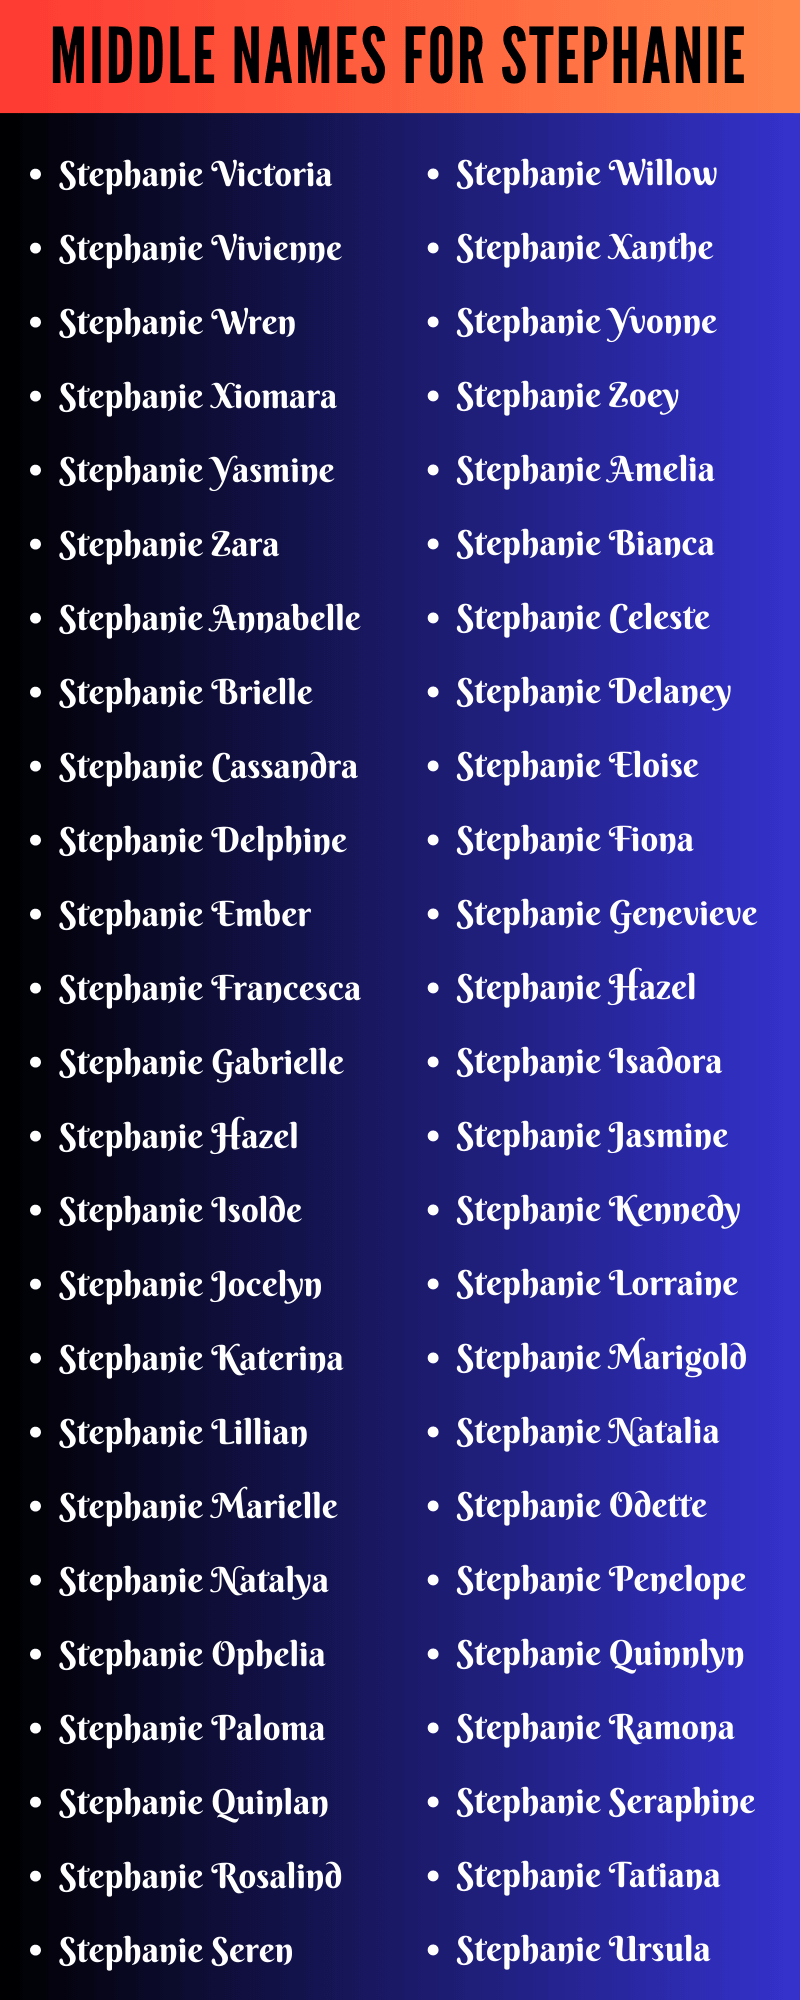 Middle Names For Stephanie